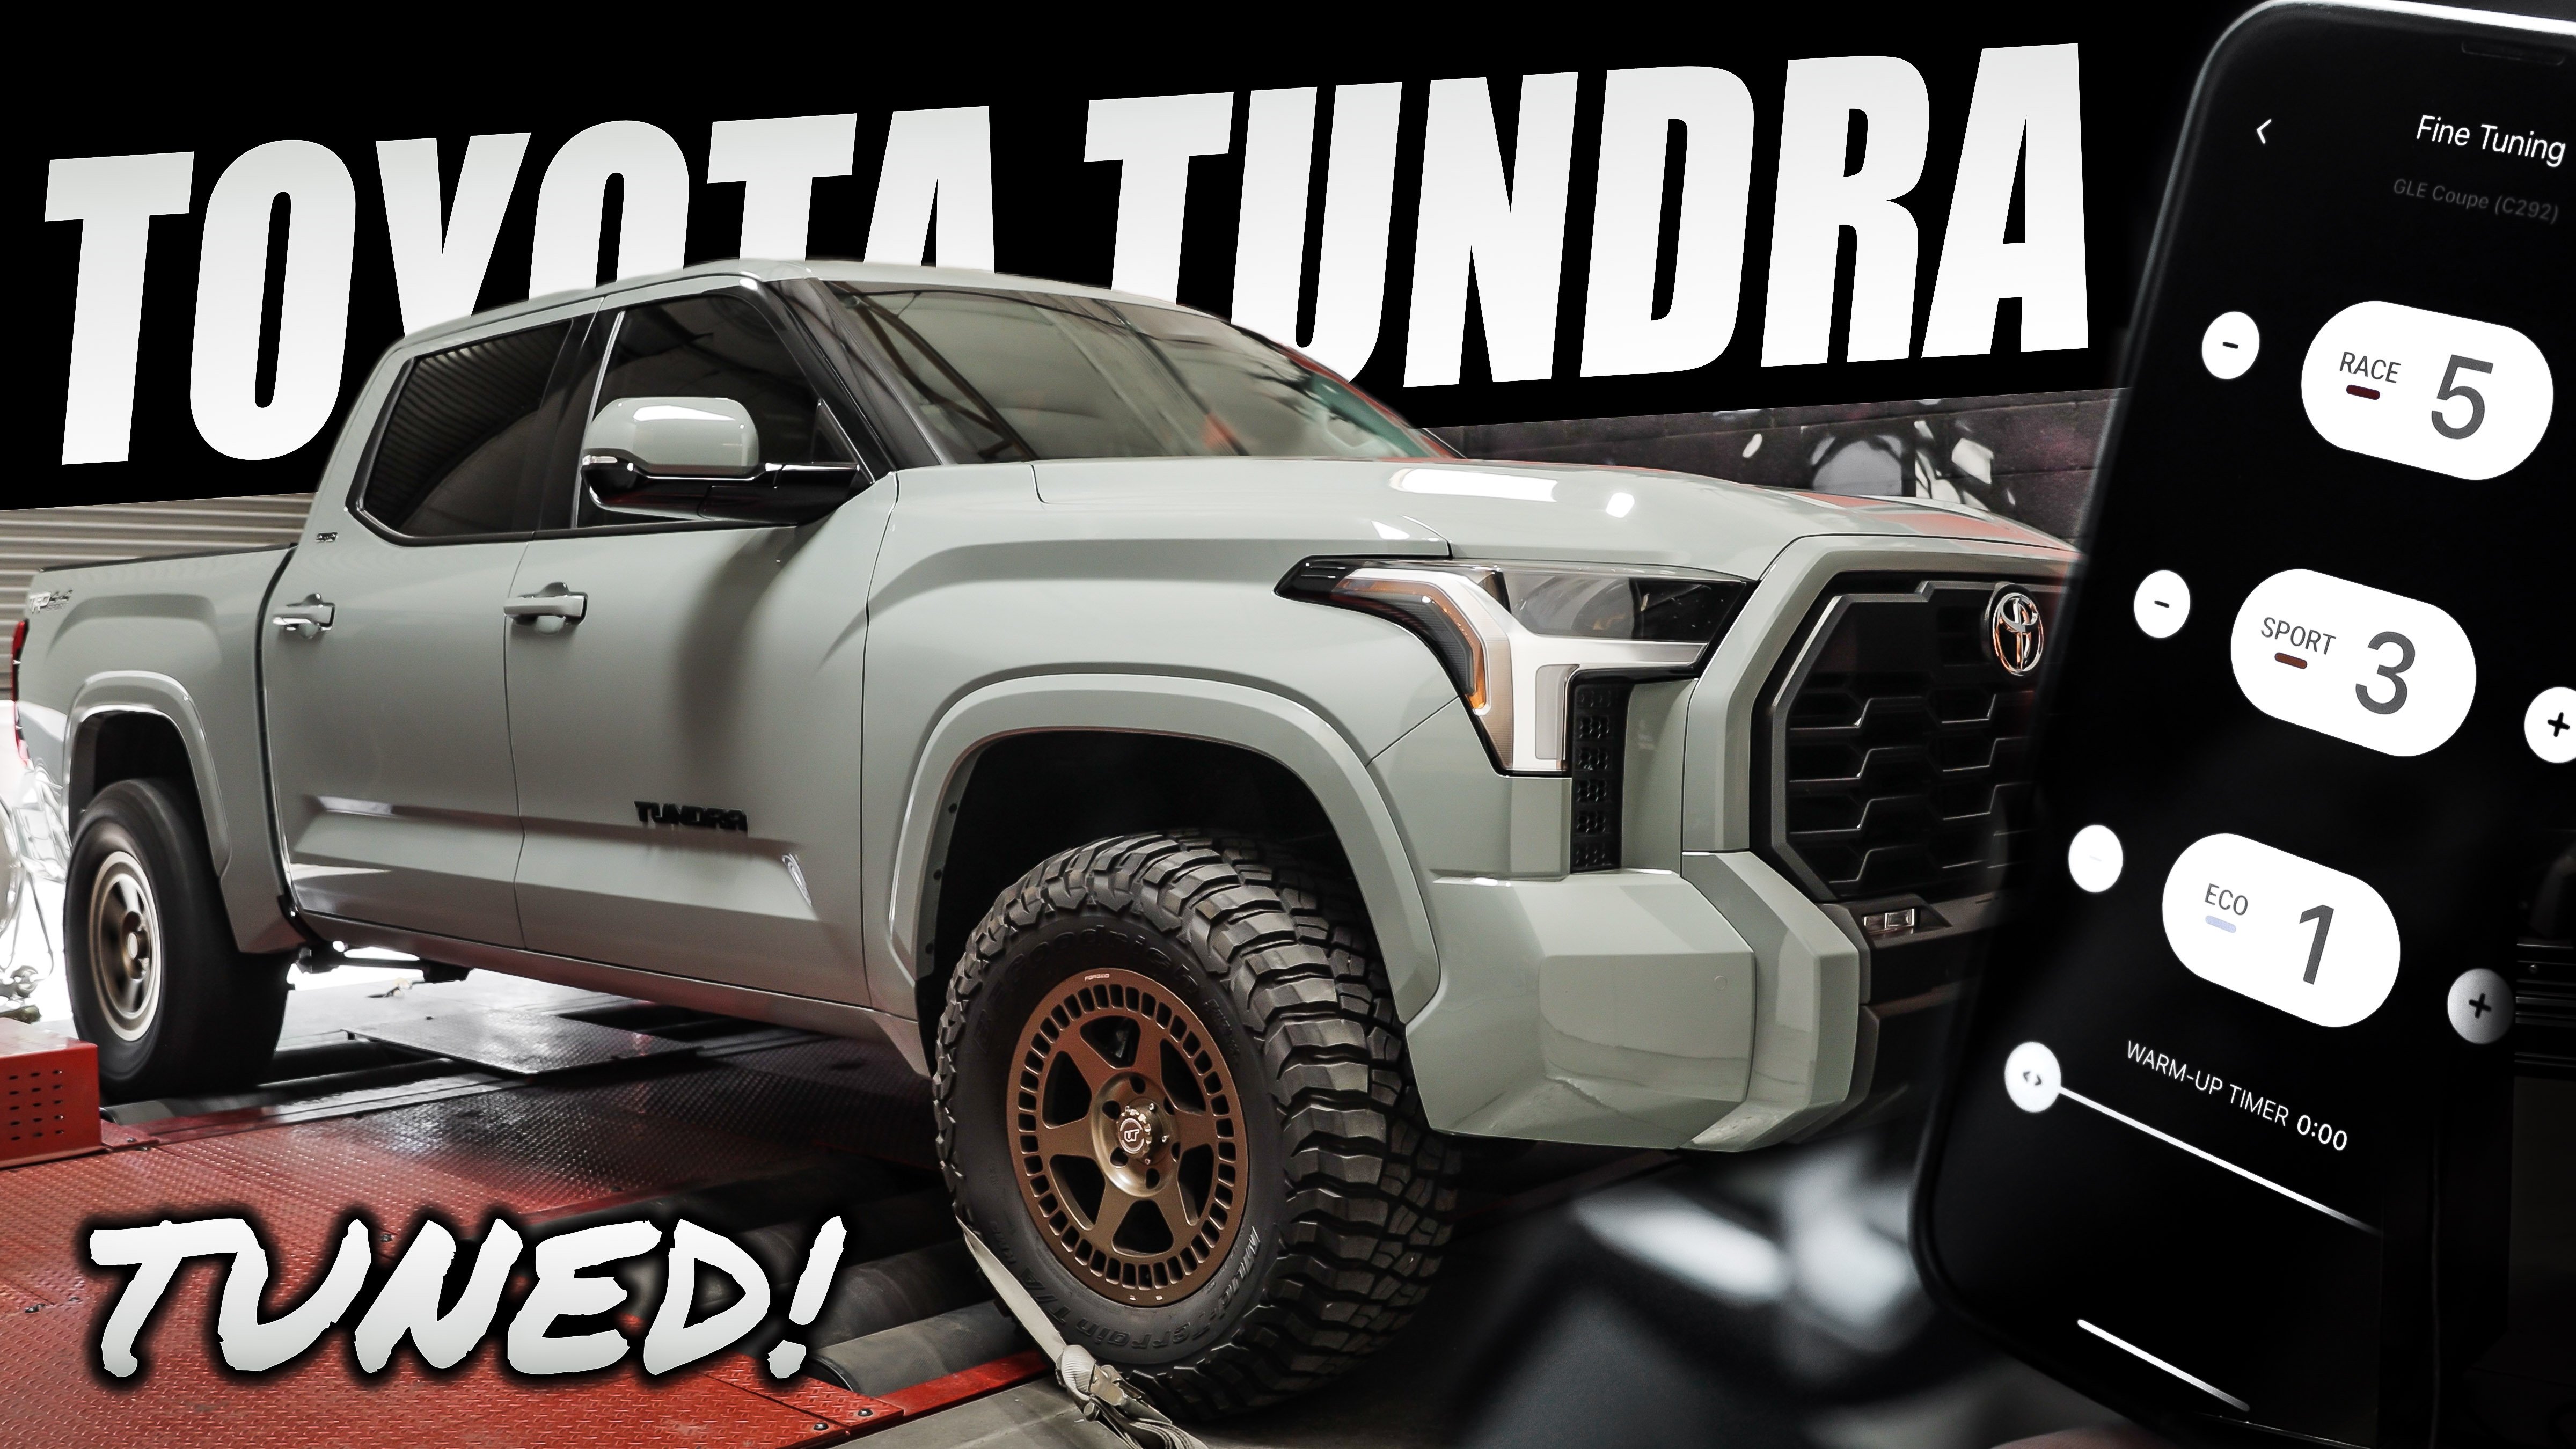 2022 Toyota Tundra Makes Large Power Gains with Simple Tune Video